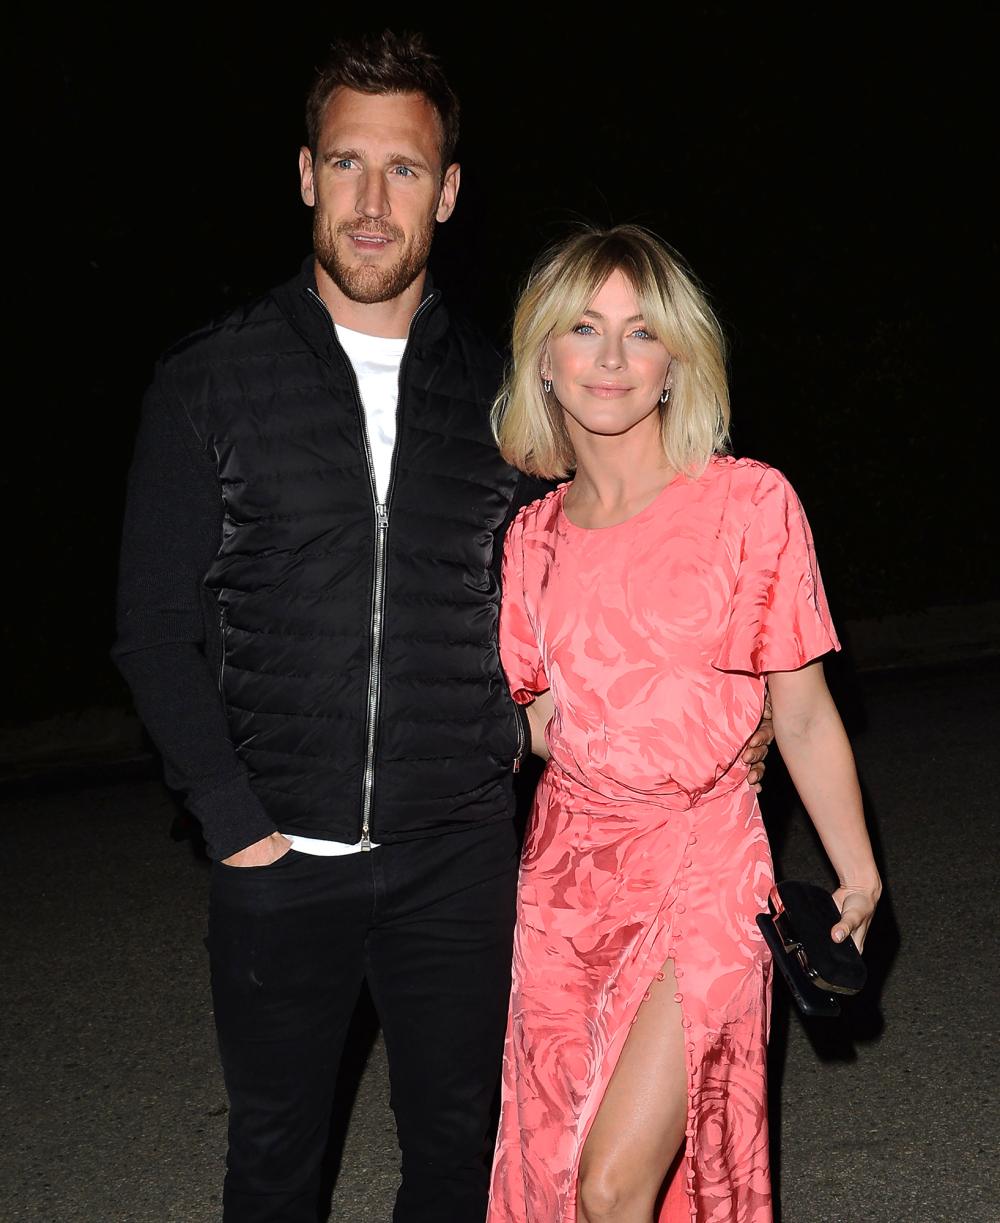 Julianne Hough and Brooks Laich Are ‘Not Doing Well’ in Their Marriage